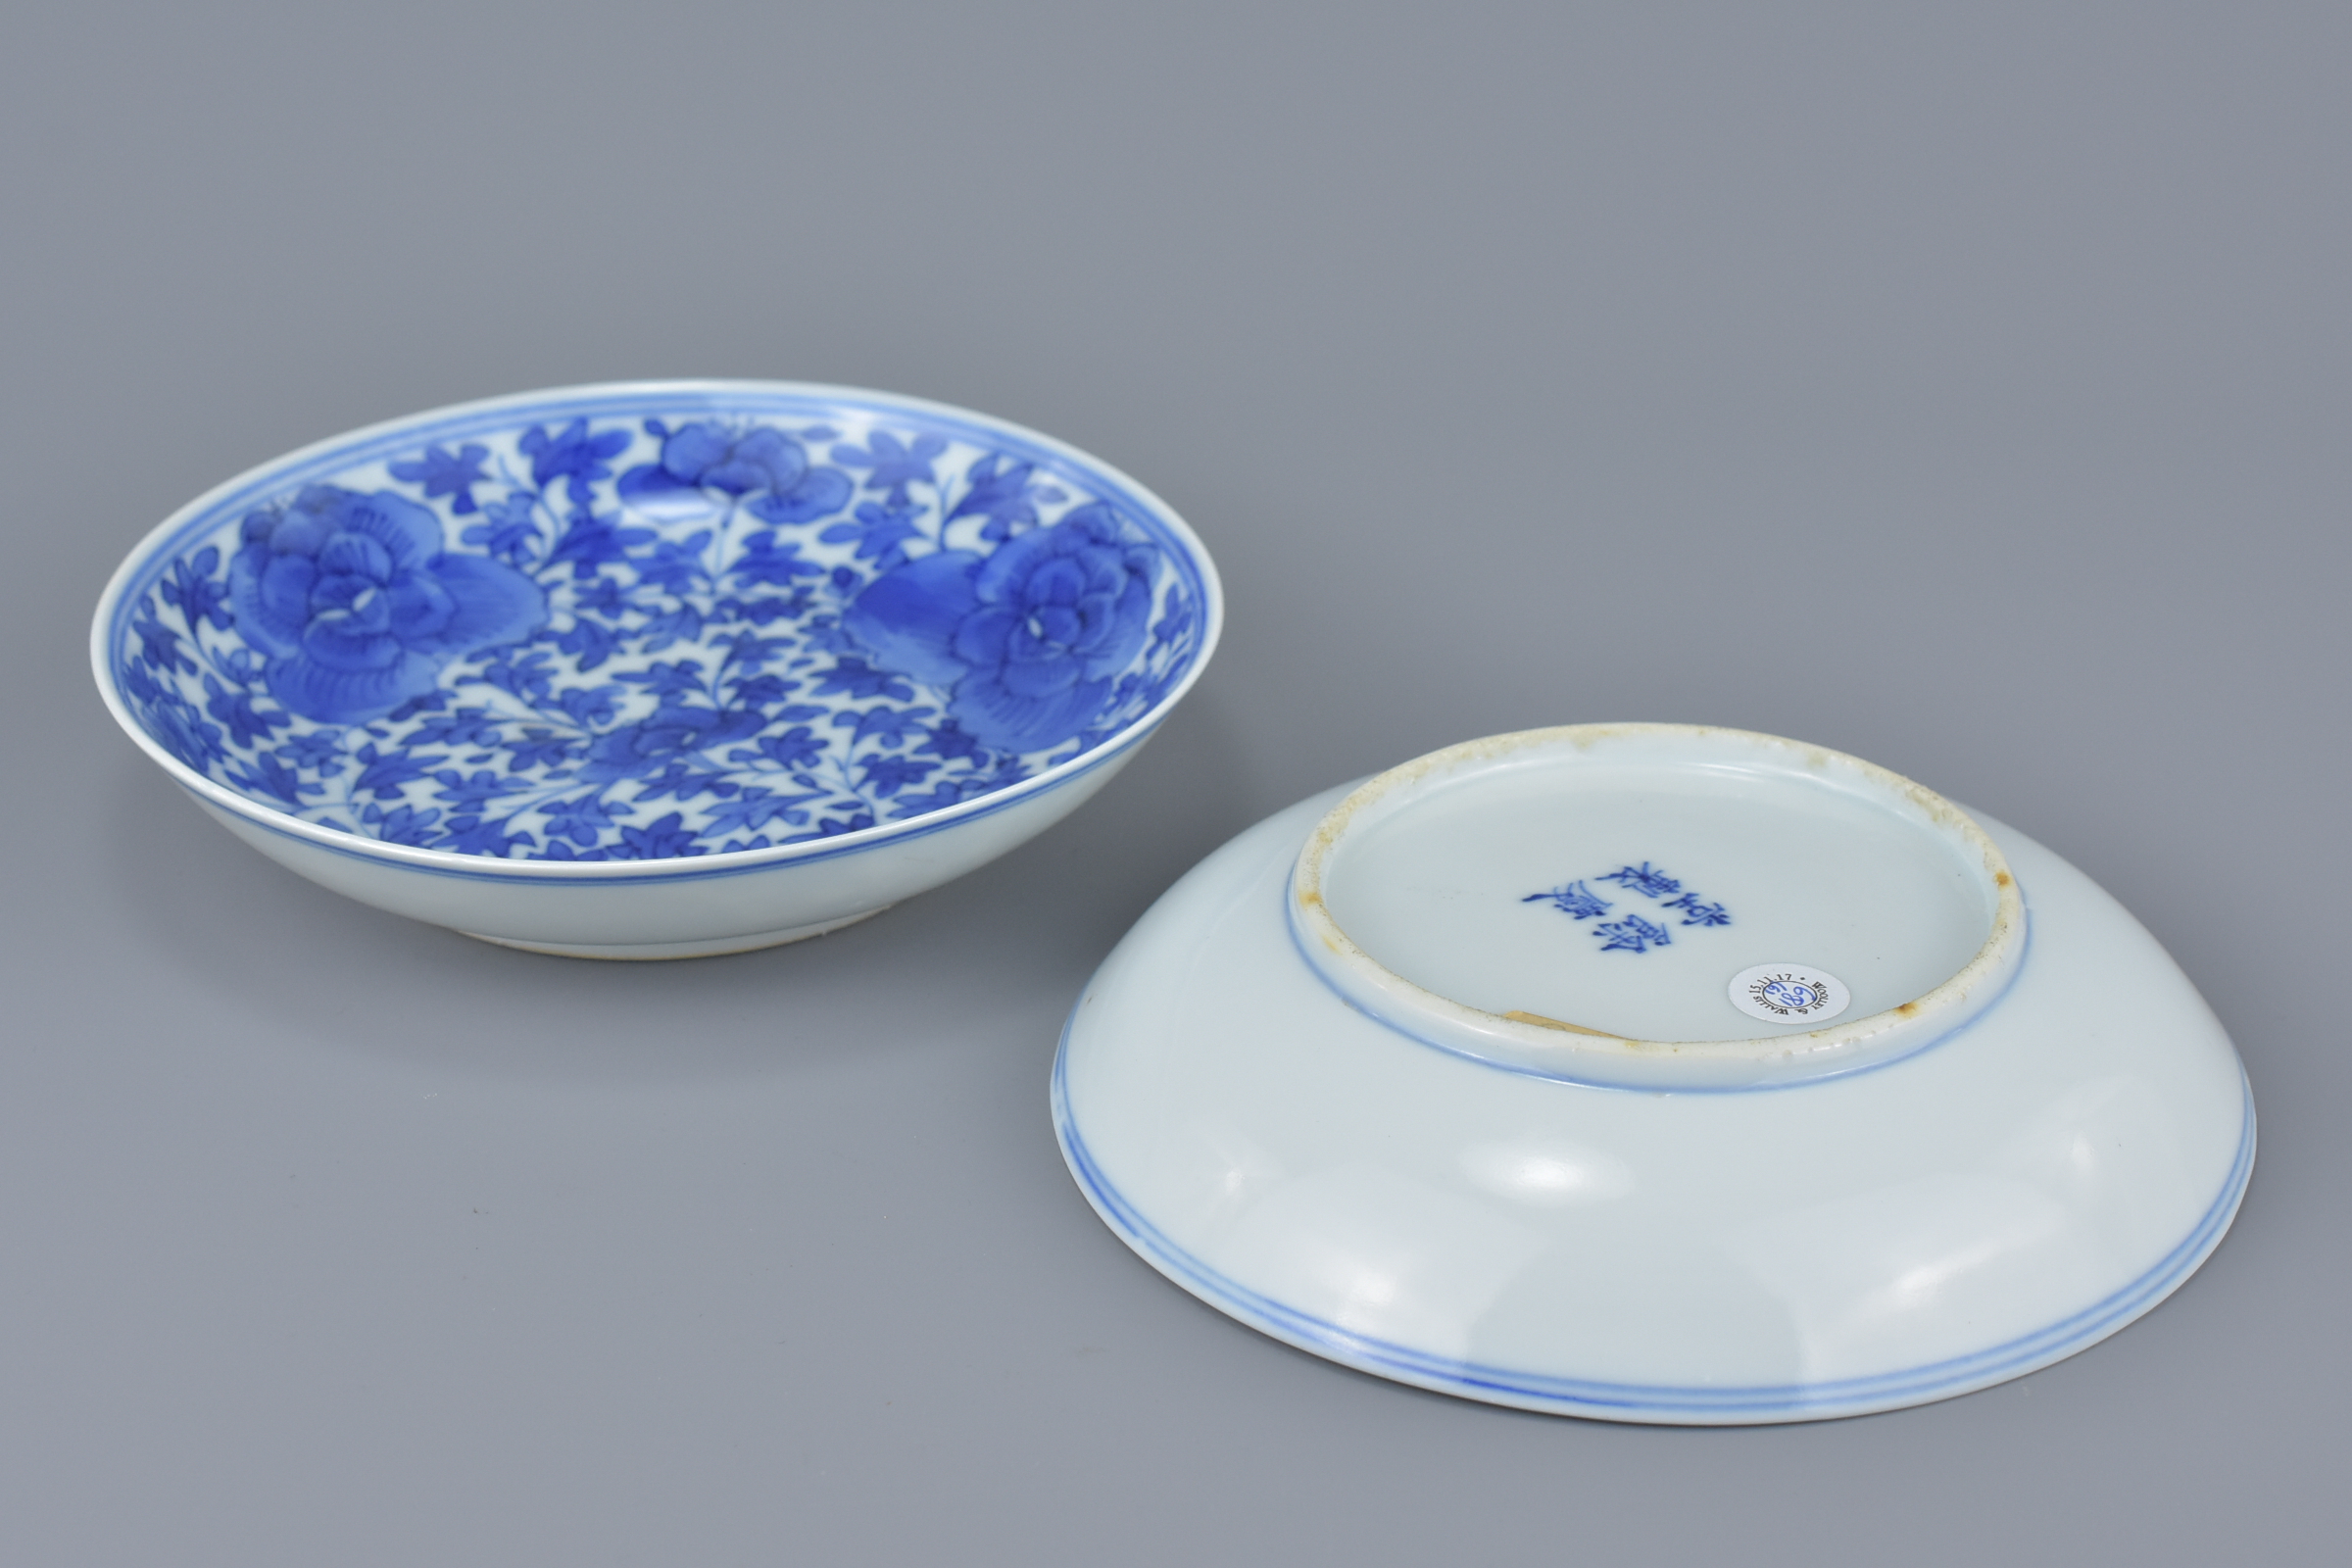 Pair of 19th century Chinese Porcelain Blue and White Saucers with four character hallmark and Wooll - Image 3 of 7